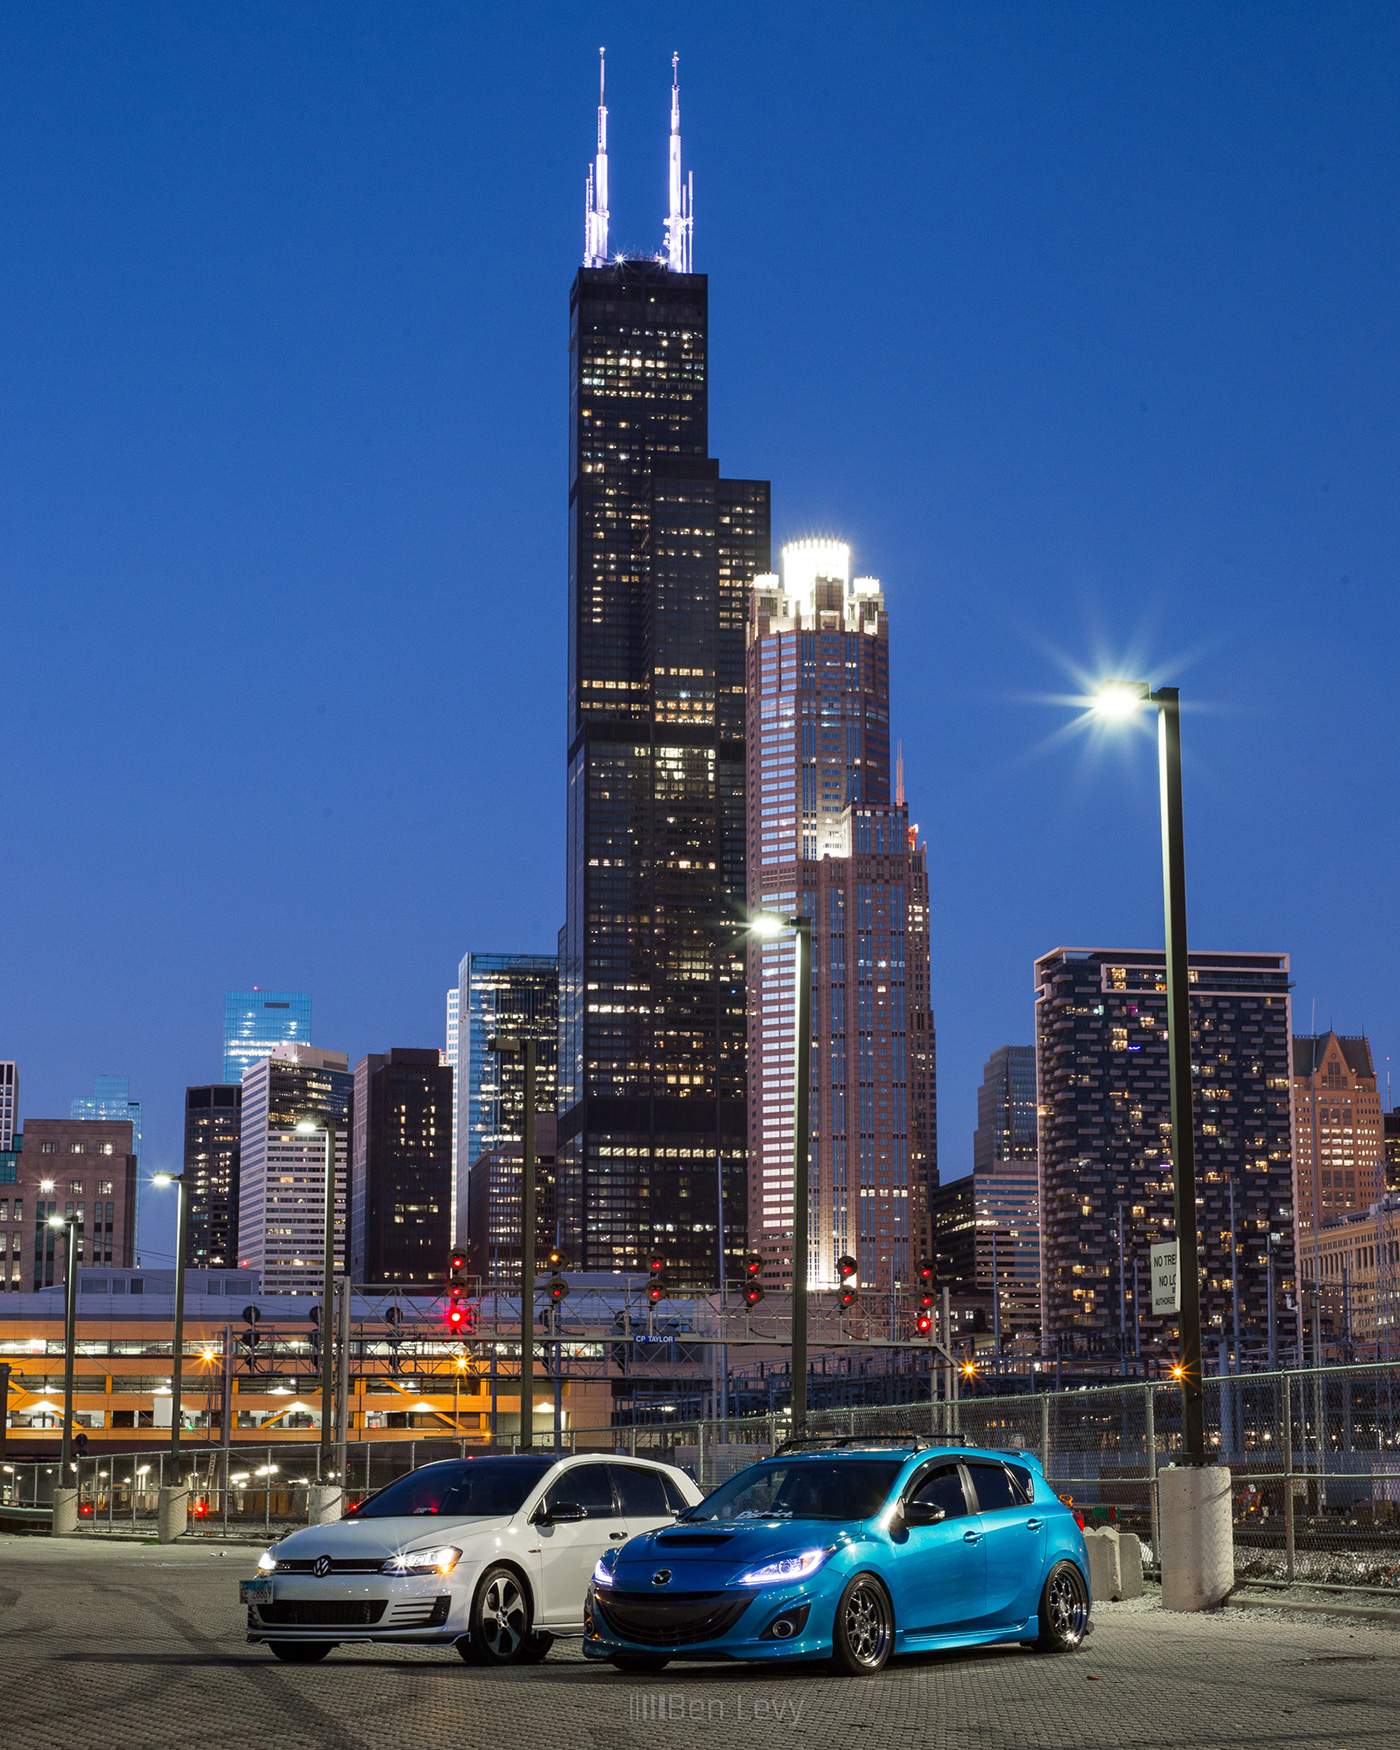 Nighttime Car Shoot with the Chicago Skyline